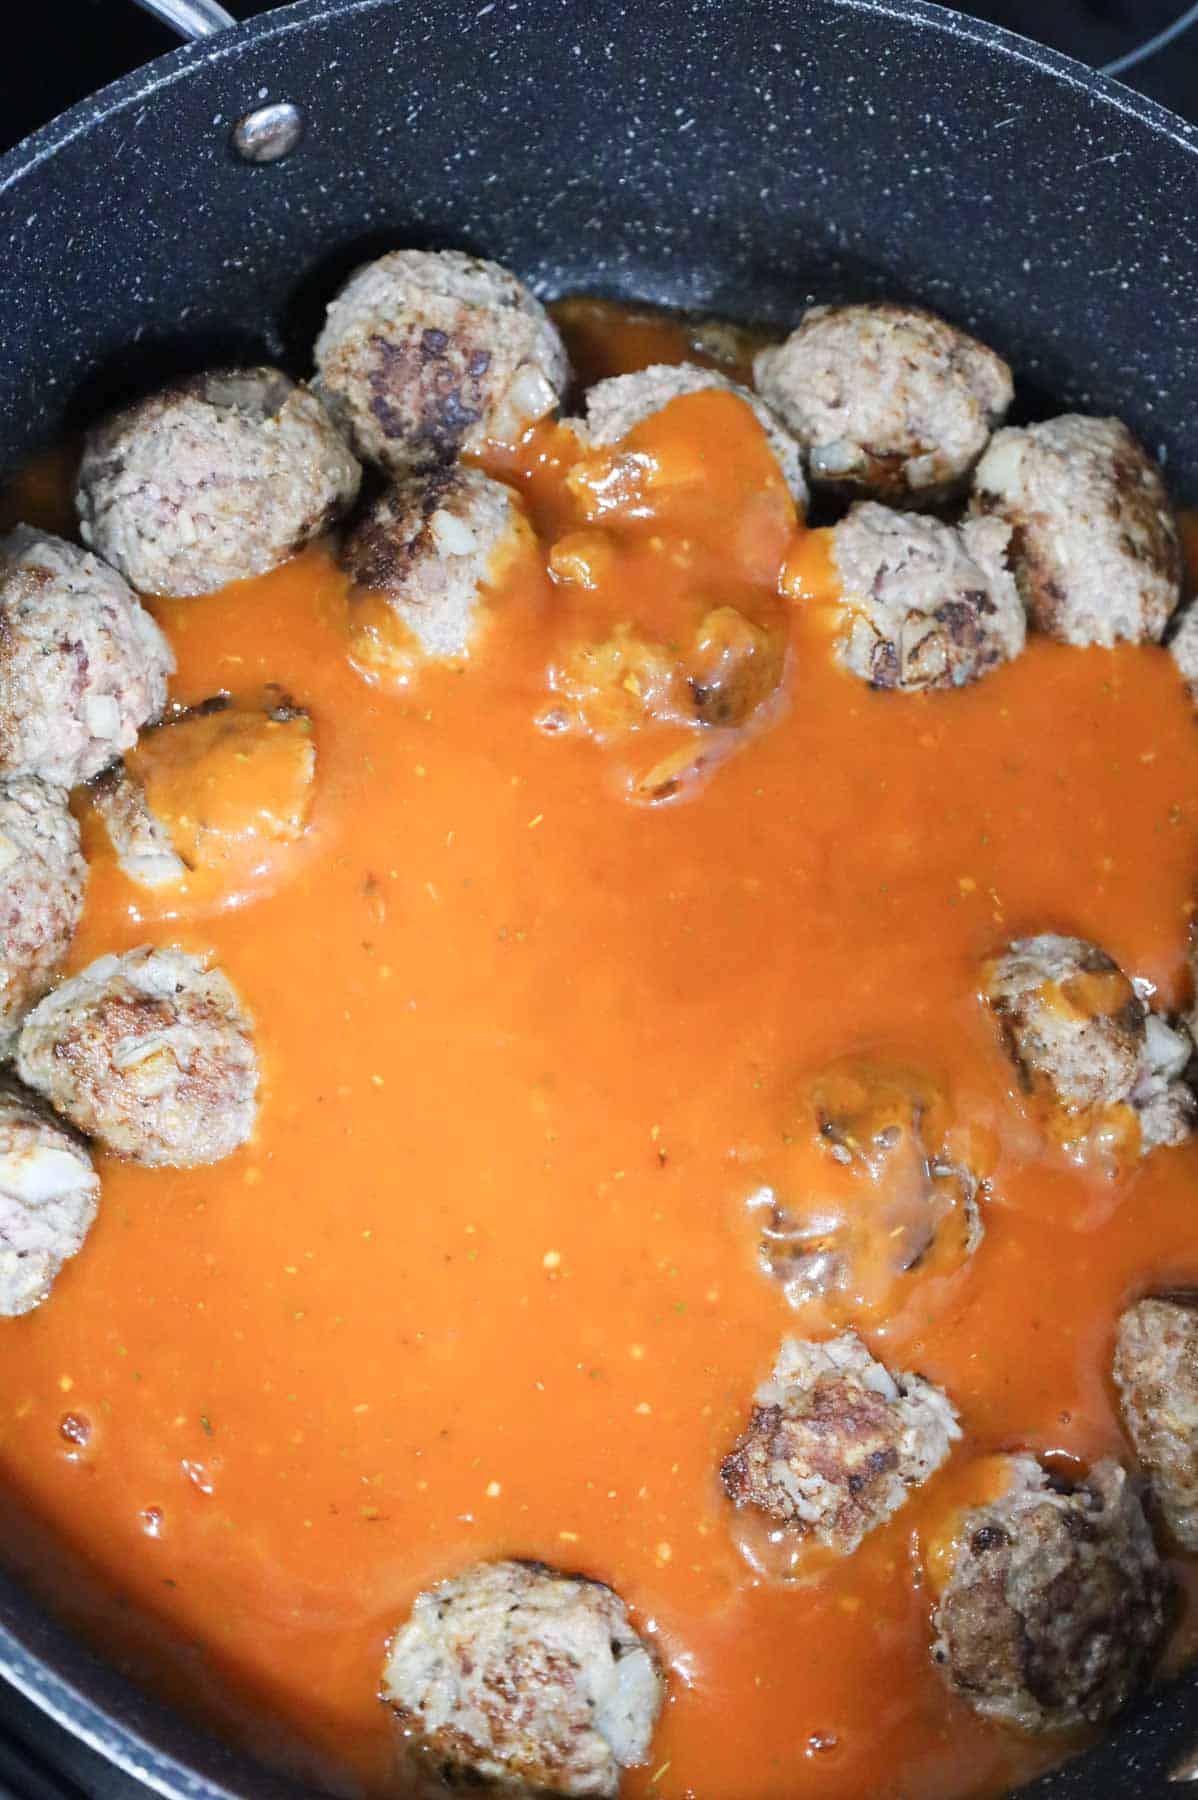 tomato soup mixture added to skillet with browned meatballs